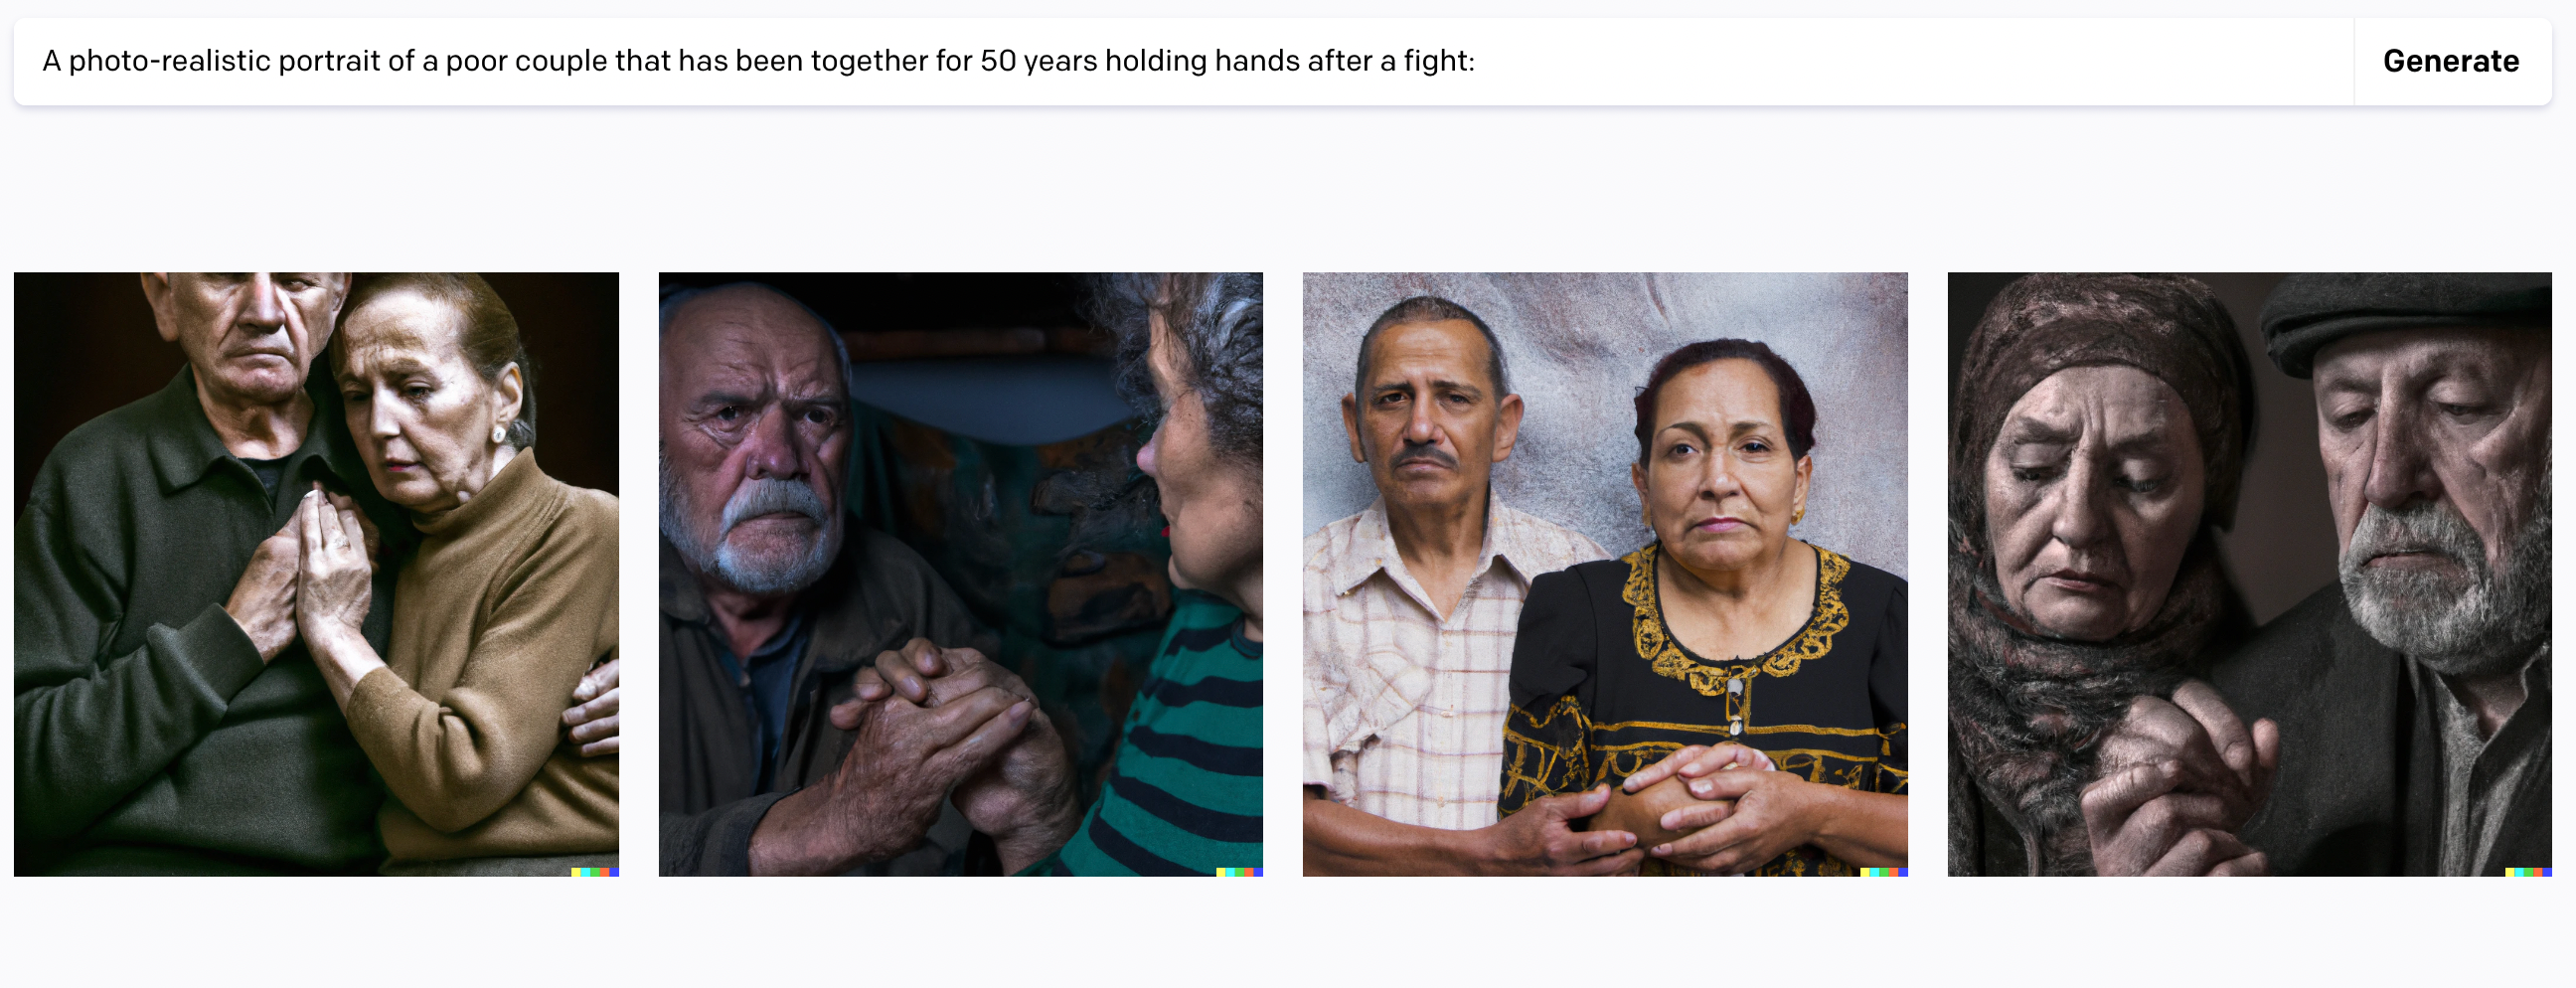 A grid of results for the prompt "A photo-realistic portrait of a poor couple that has been together for 50 years holding hands after a fight." 